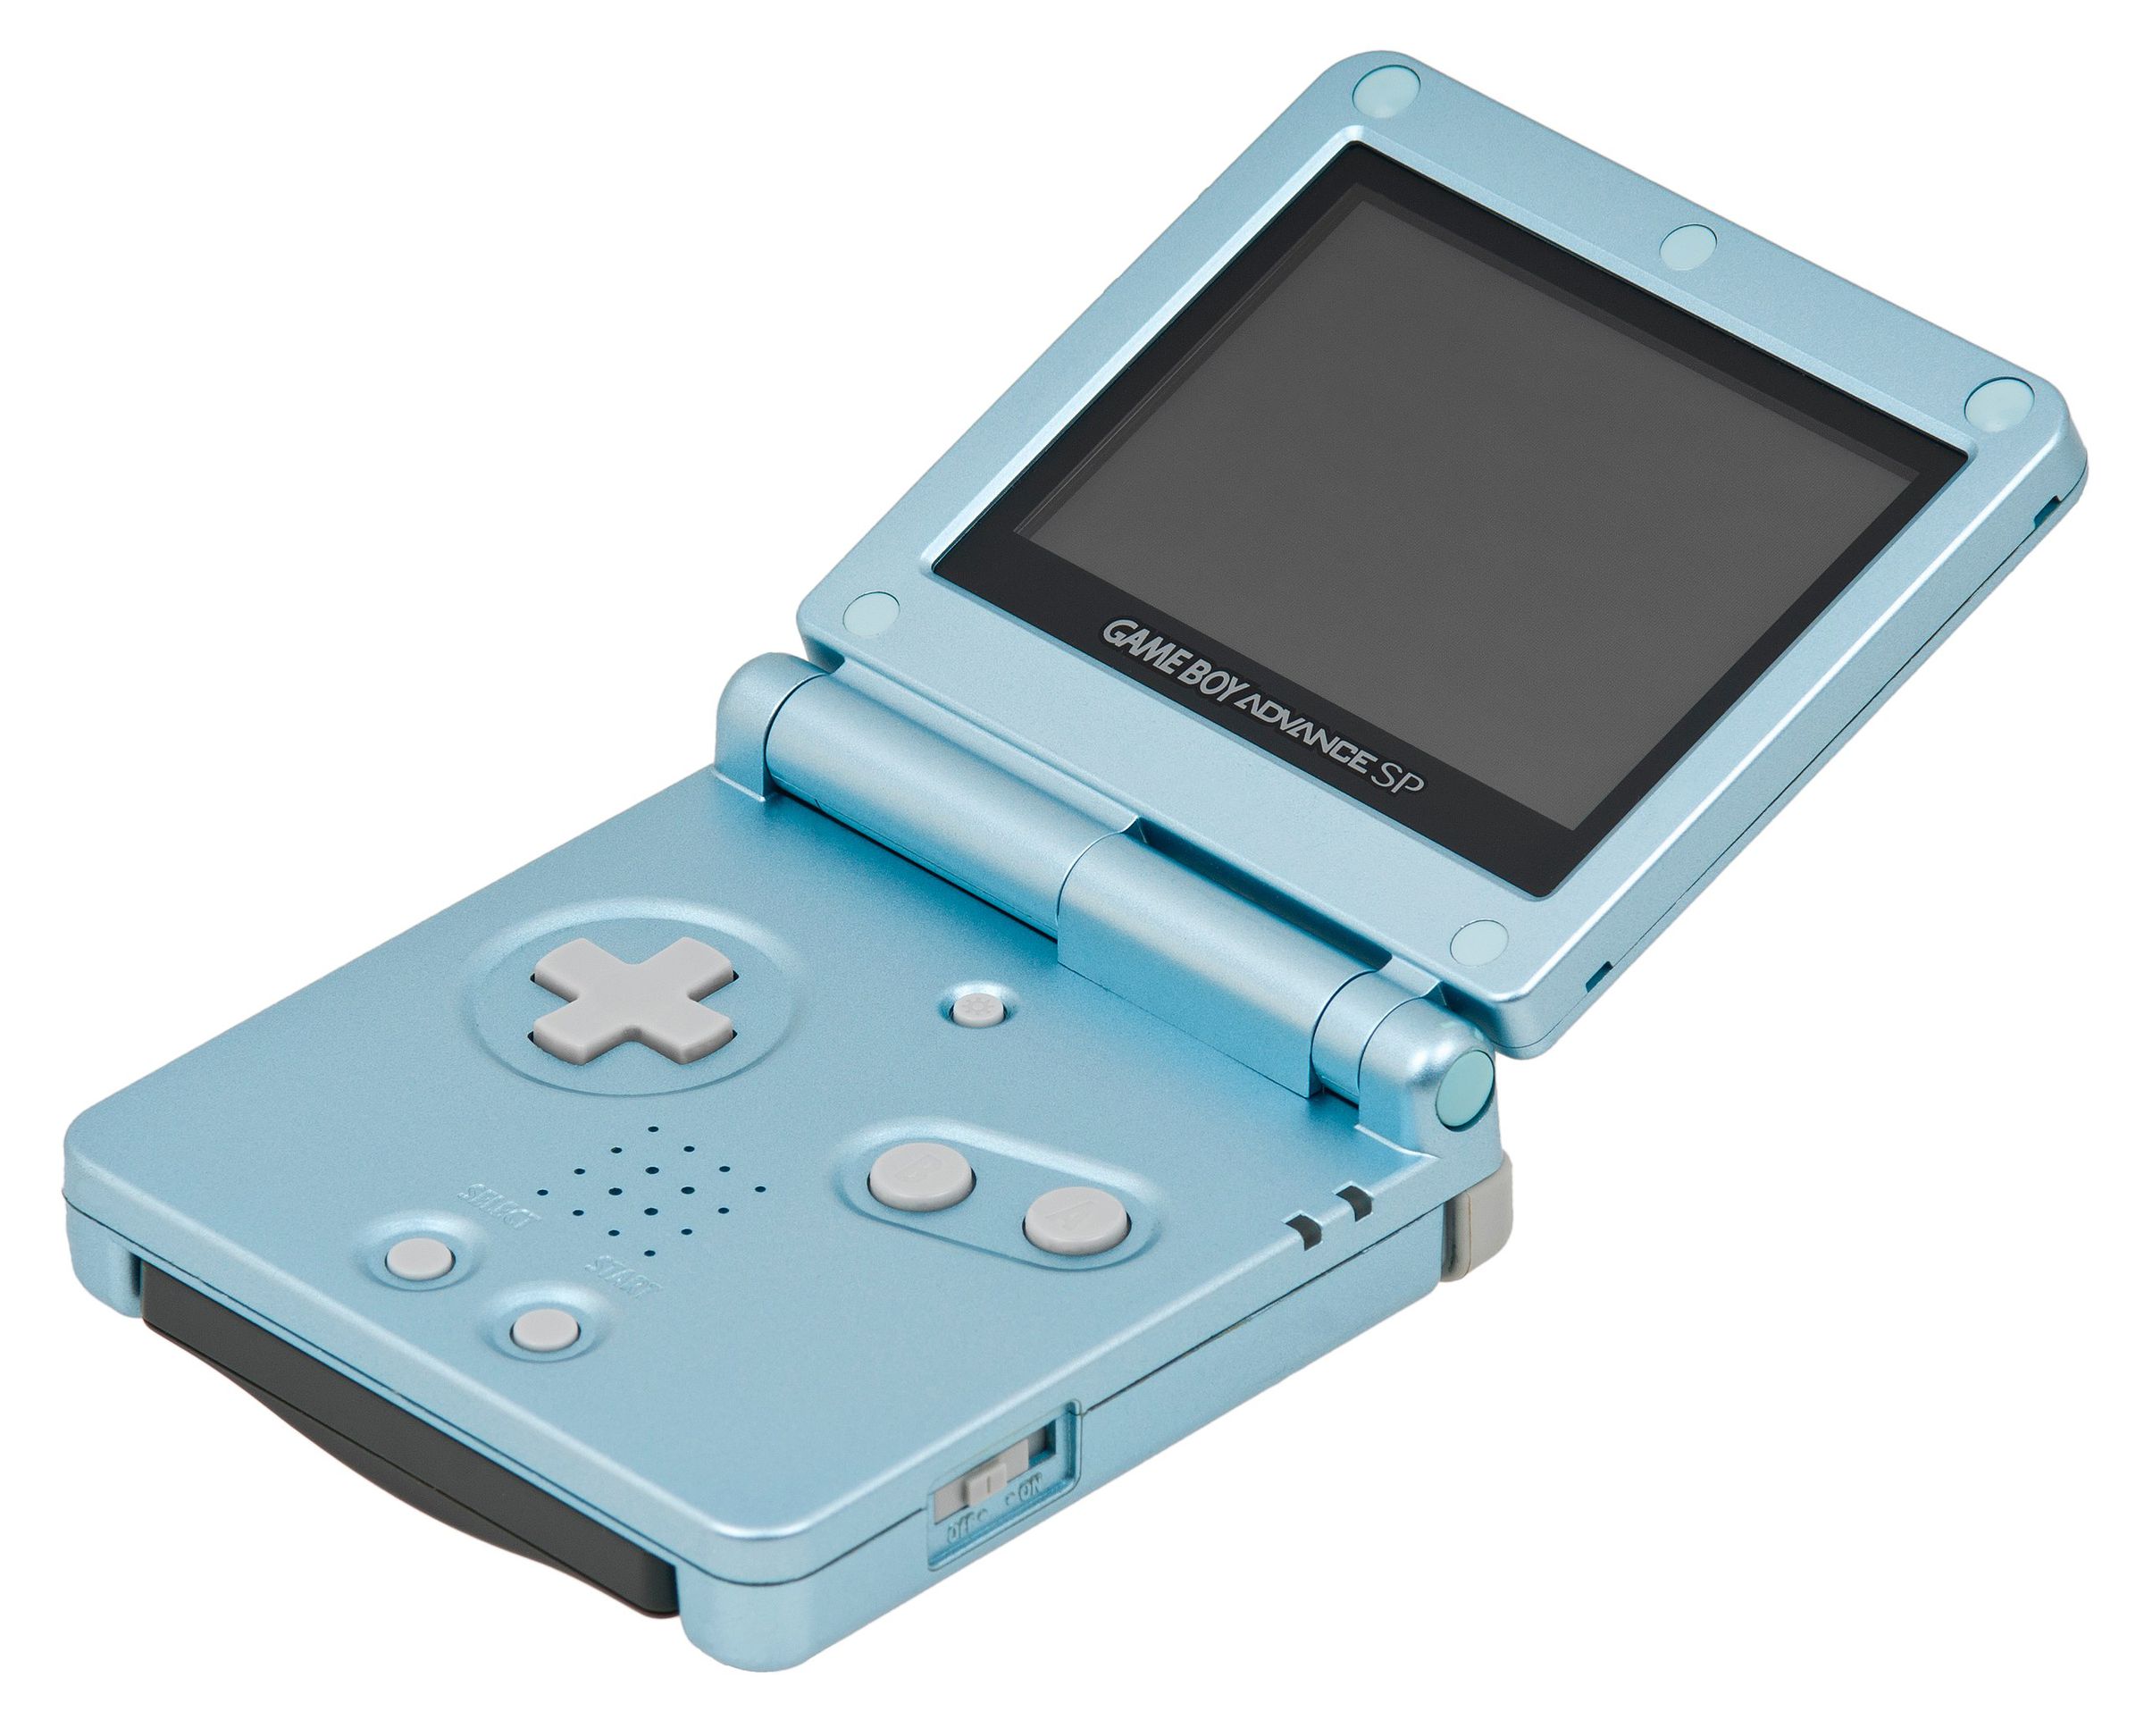 The Game Boy Advance SP.